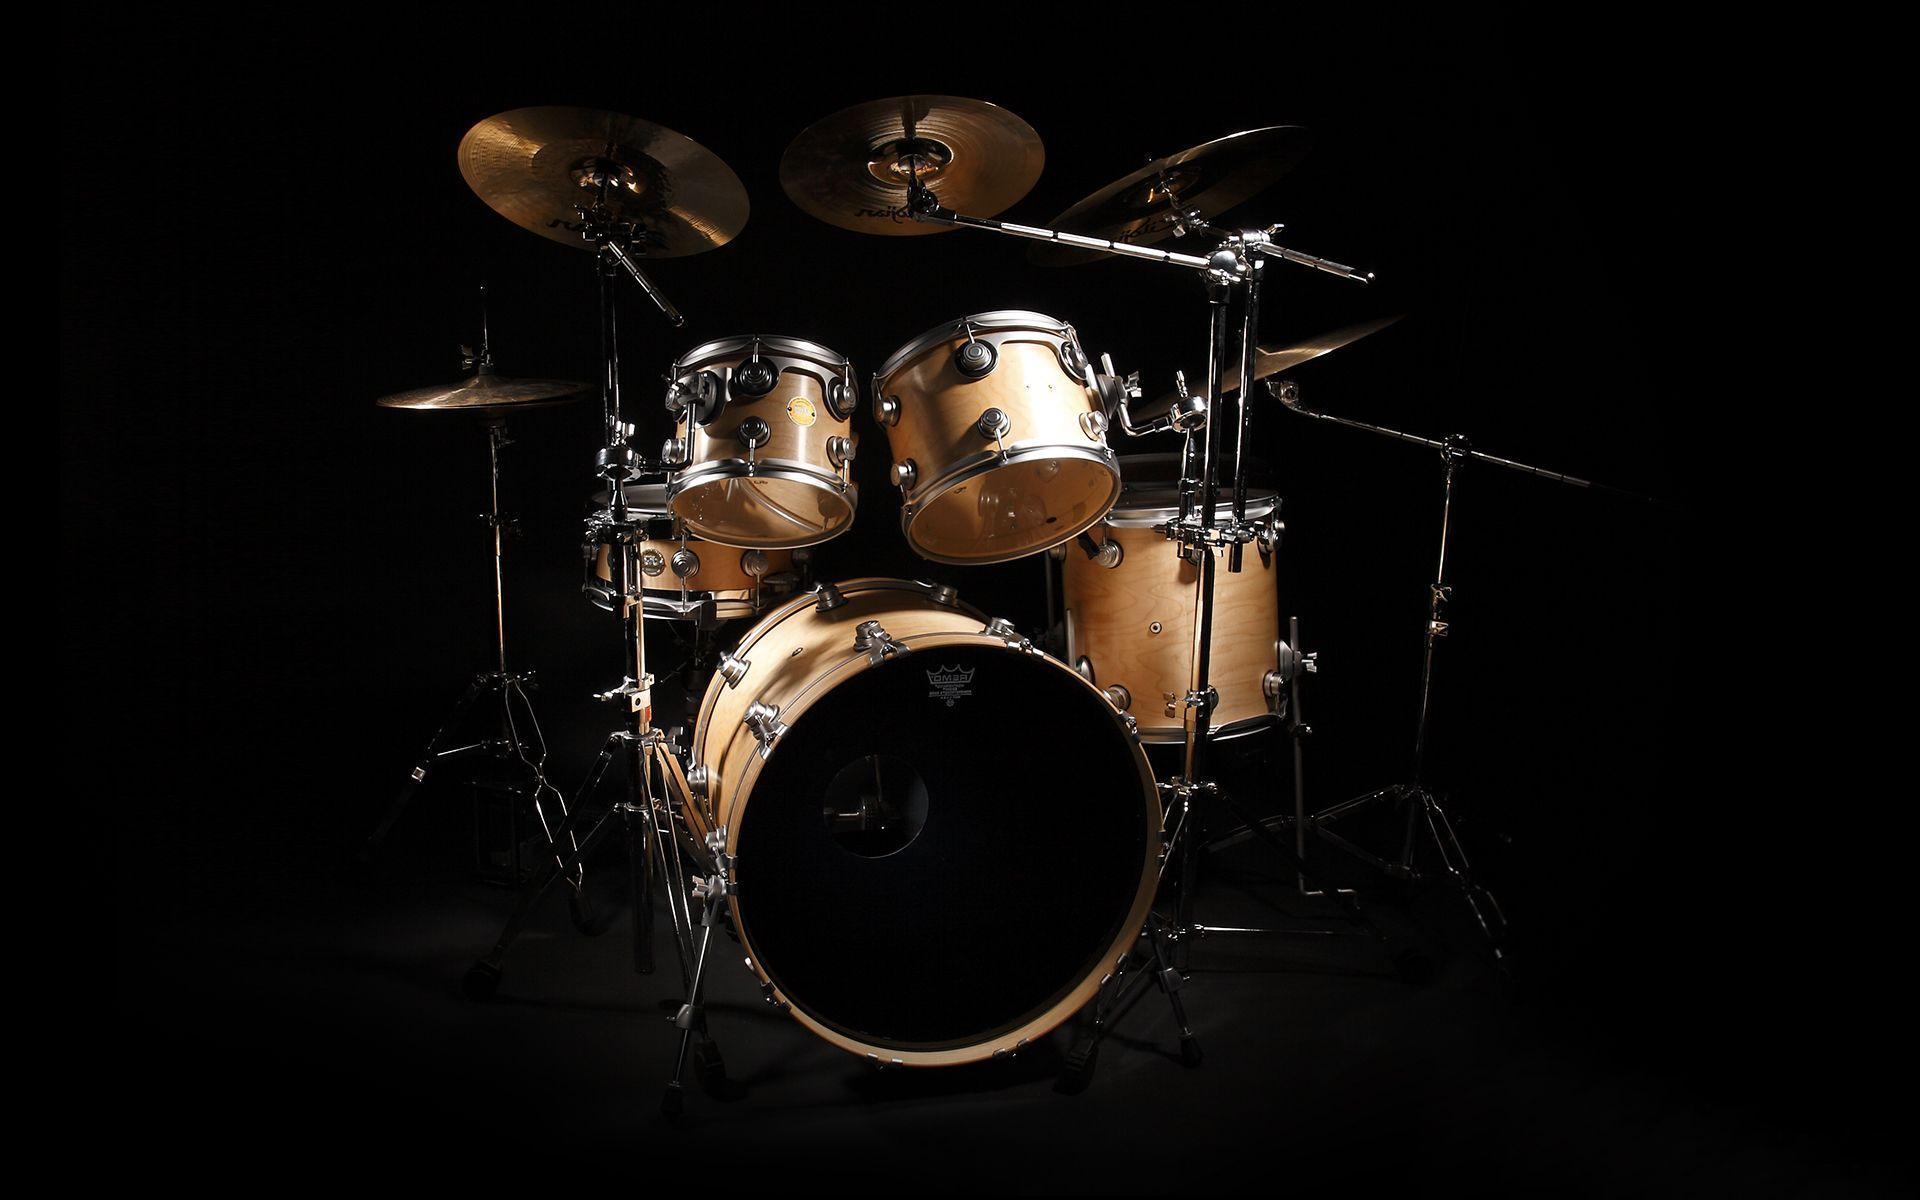 Download Drums wallpapers for mobile phone free Drums HD pictures